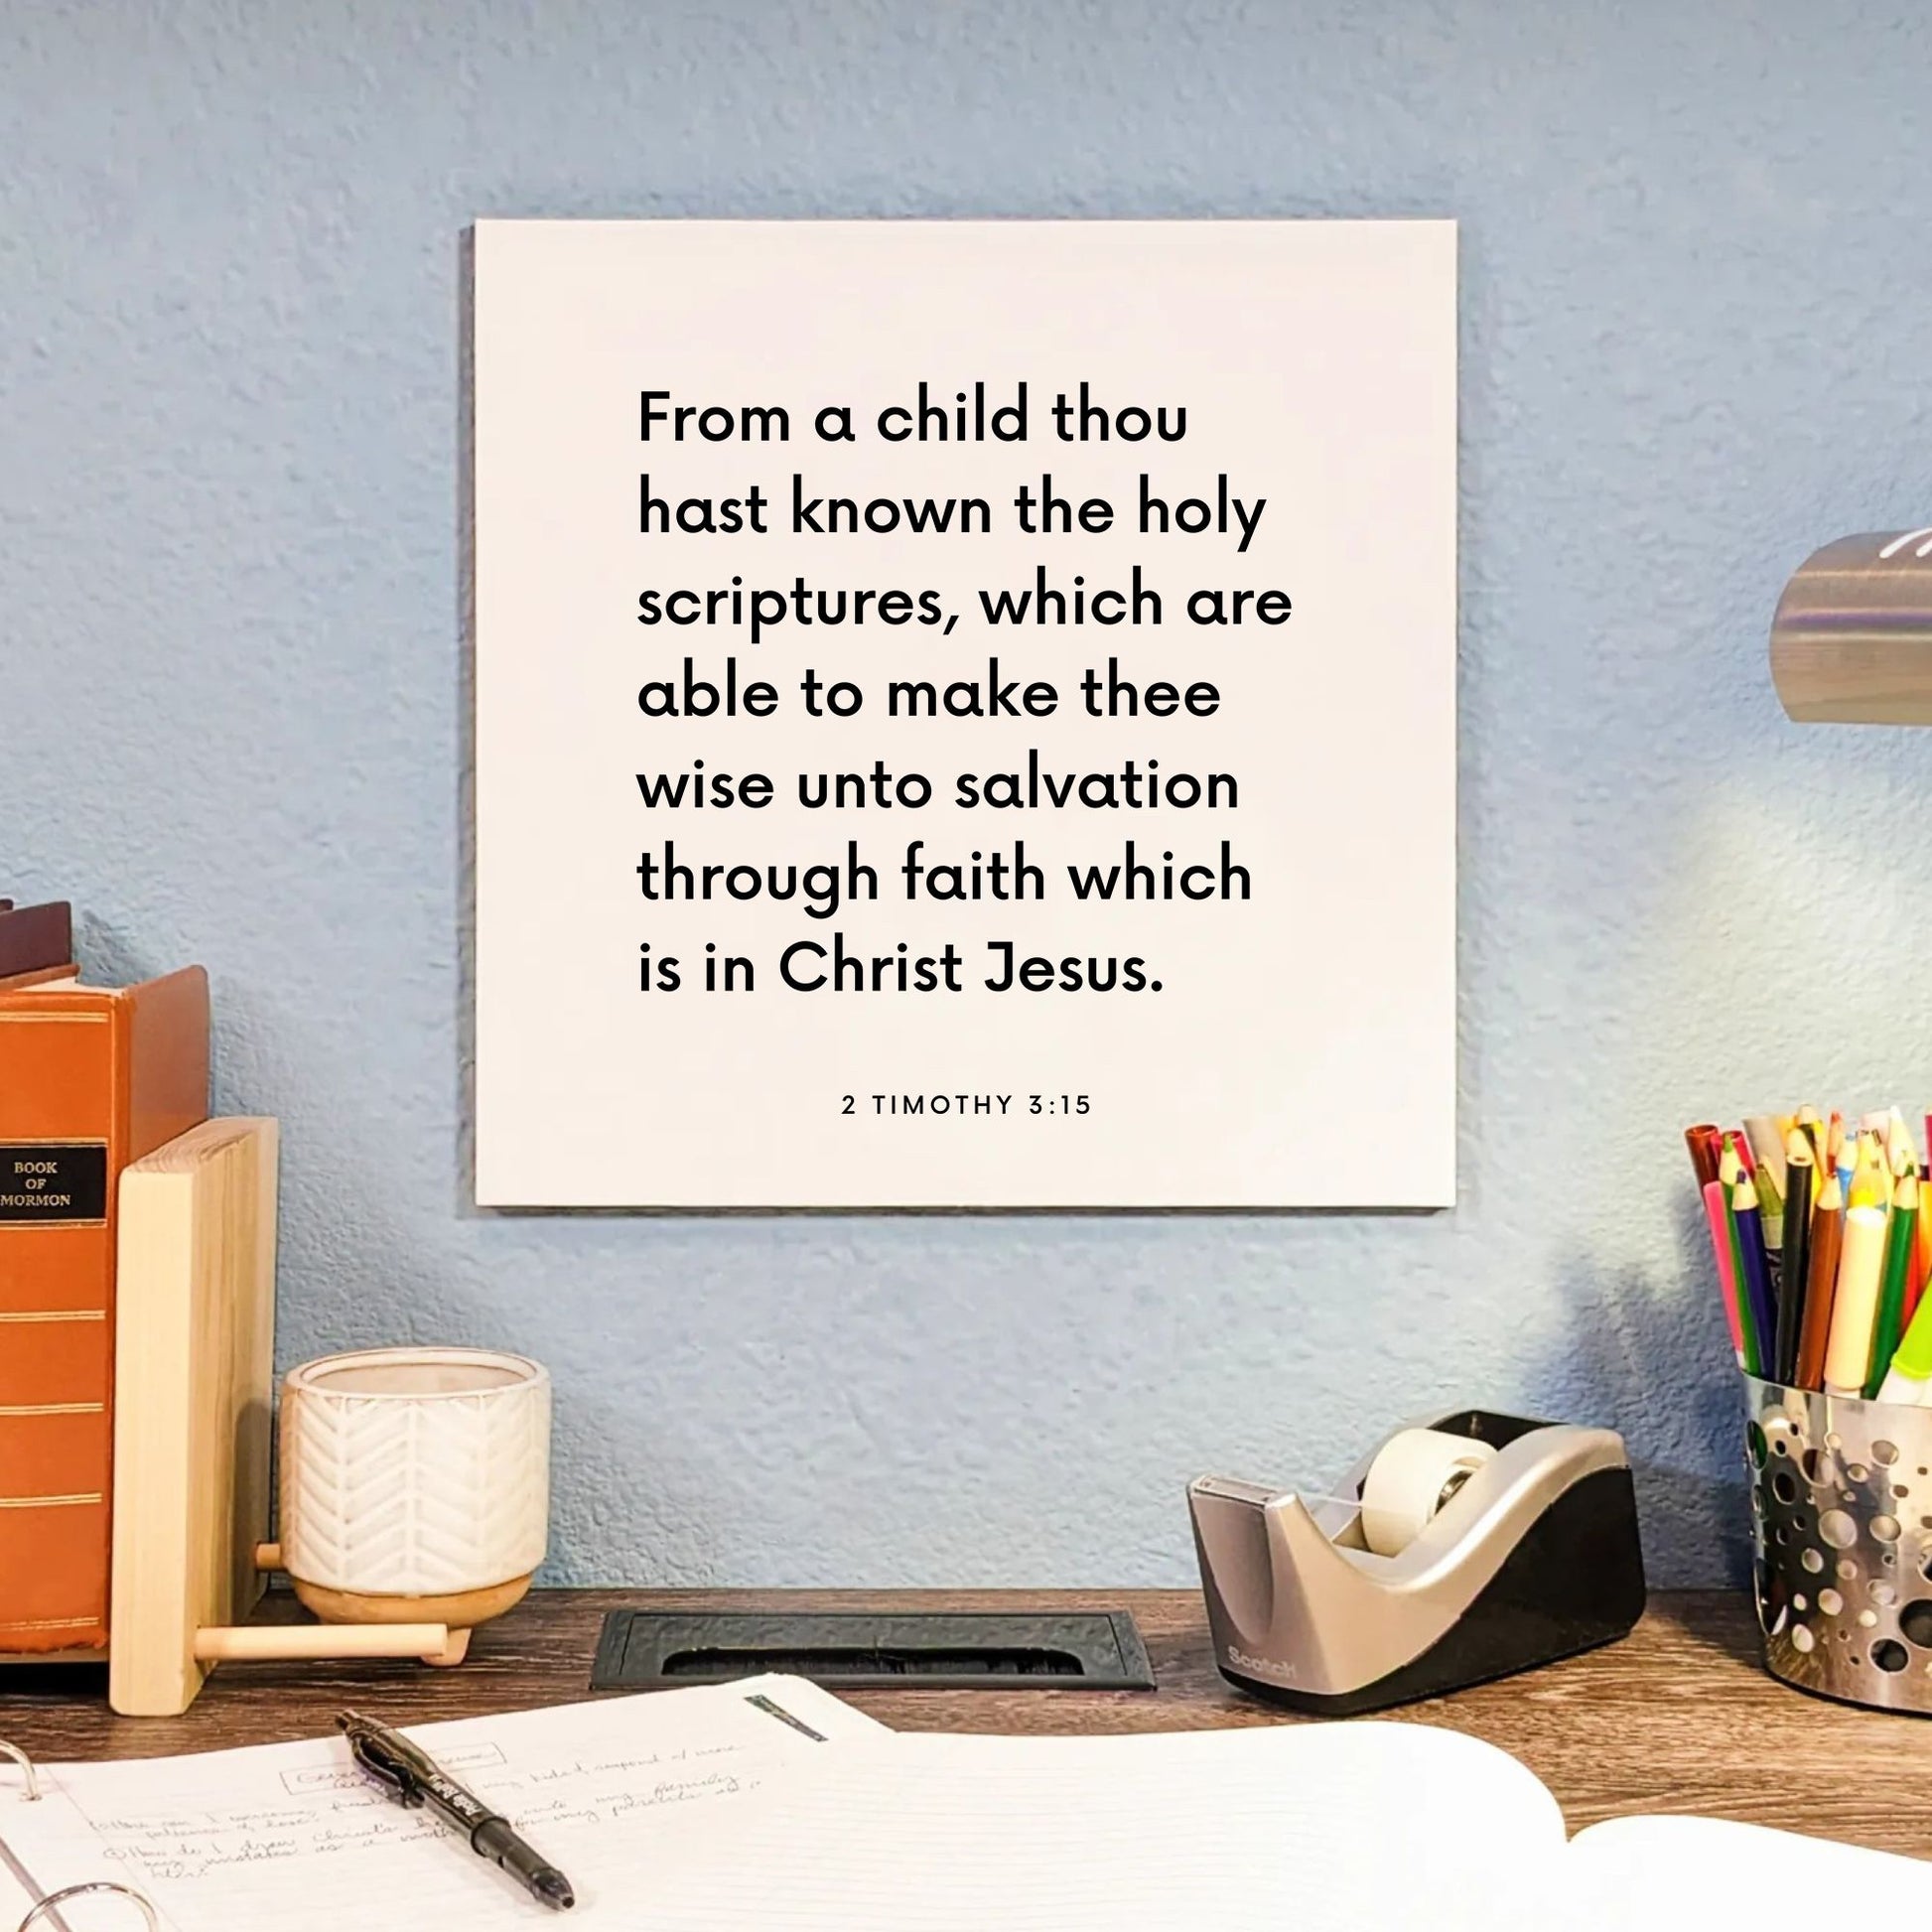 Desk mouting of the scripture tile for 2 Timothy 3:15  - "From a child thou hast known the holy scriptures"